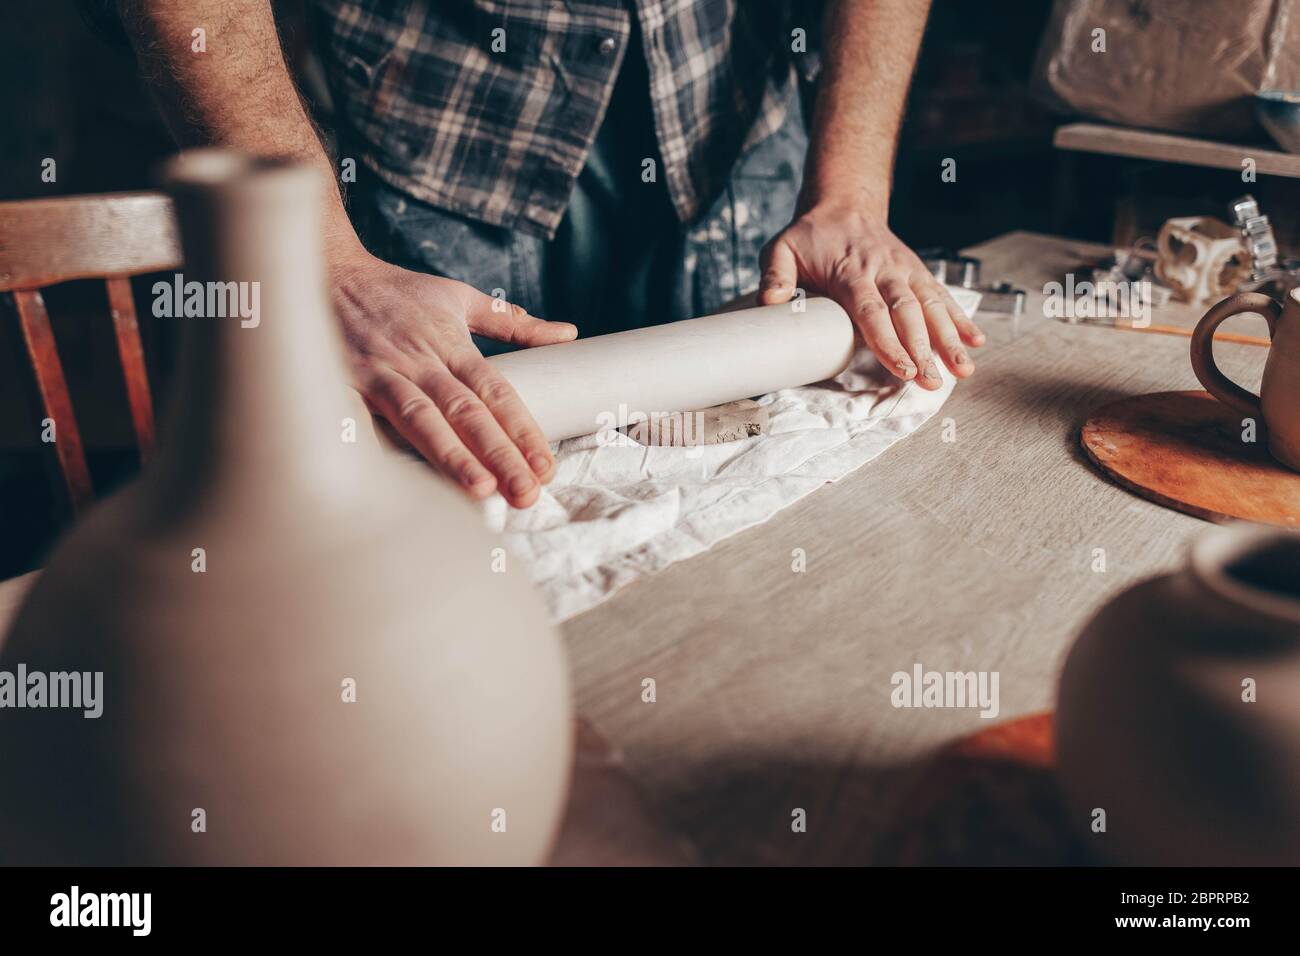 Potter rolls clay. Process of creating a cup of clay products in a pottery workshop Stock Photo